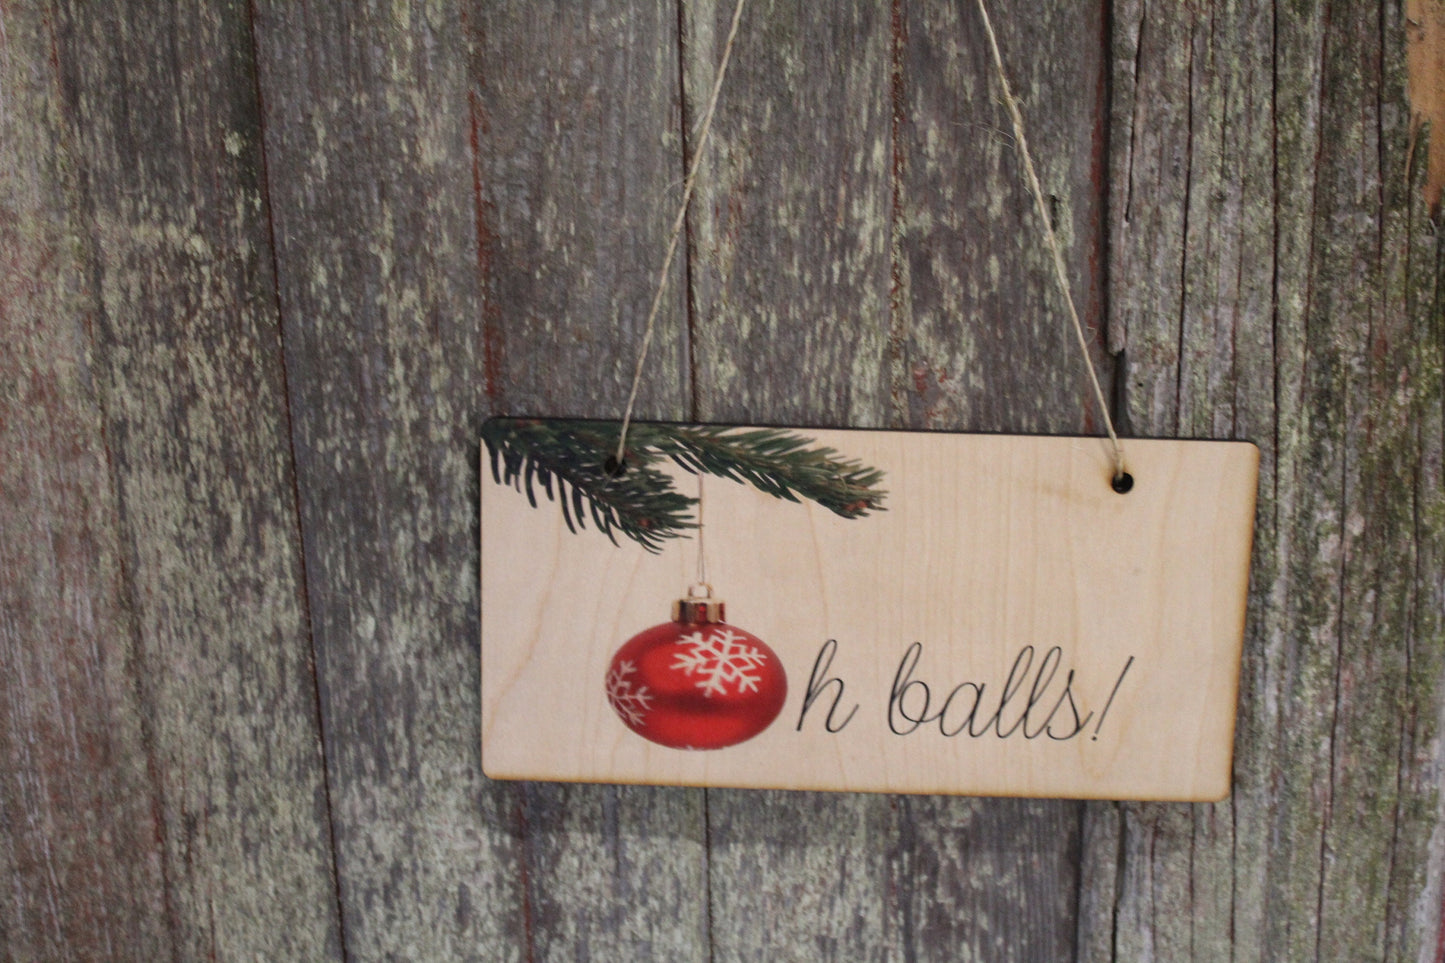 Oh Balls! Wood Sign Christmas Hanging Wall Decoration Decor Winter Ornament Wall Art Home Accent Funny Quote